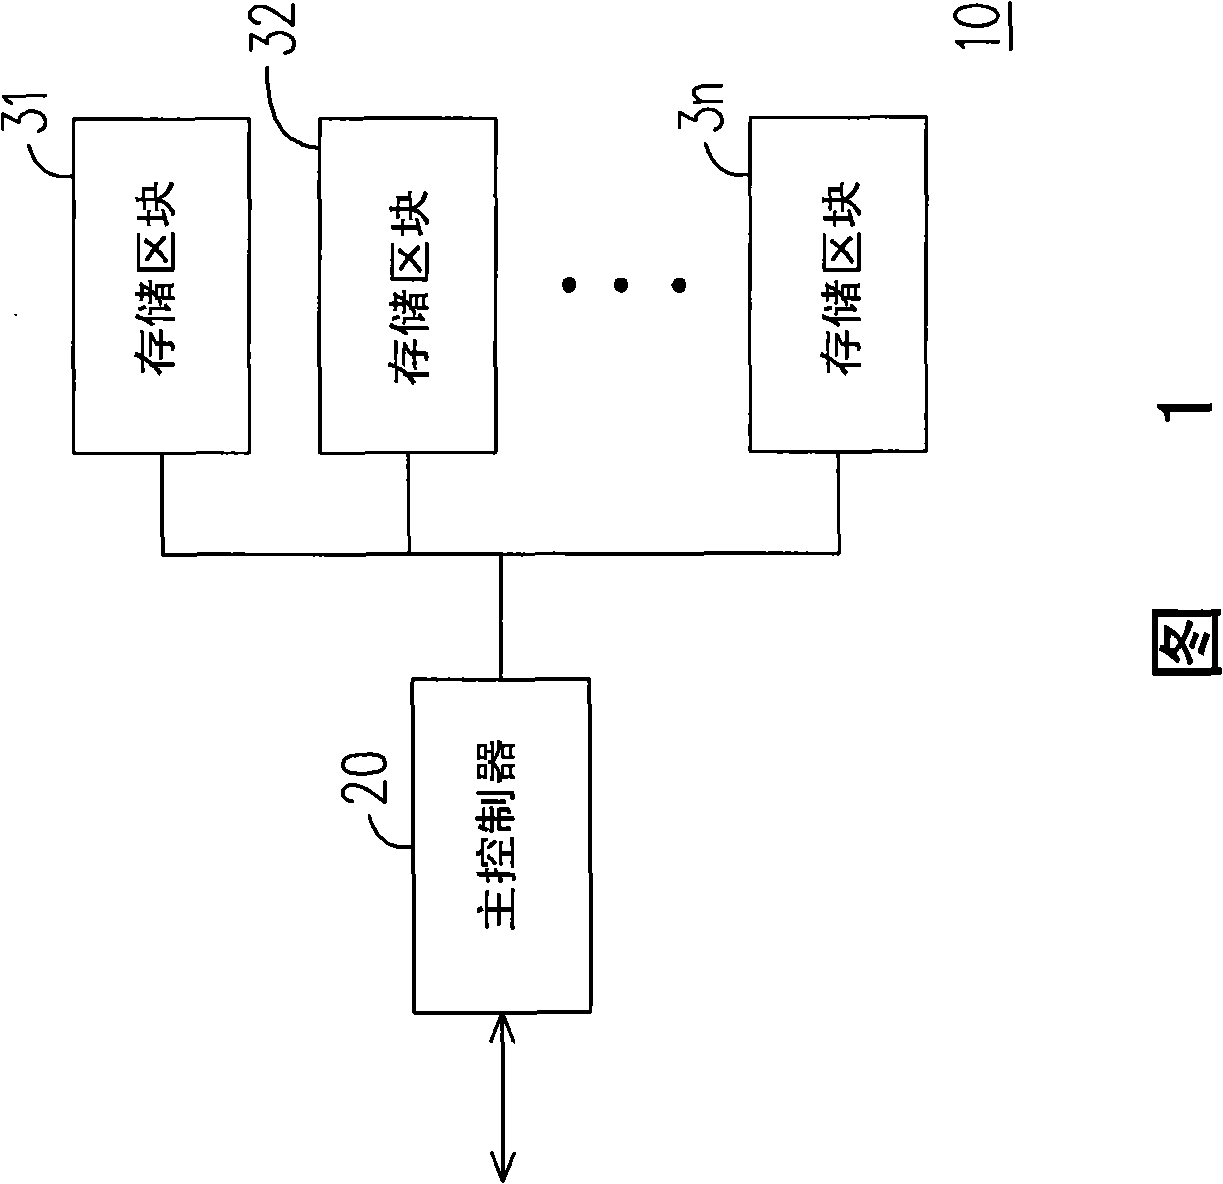 Non-volatile memory device and data access circuit and method thereof